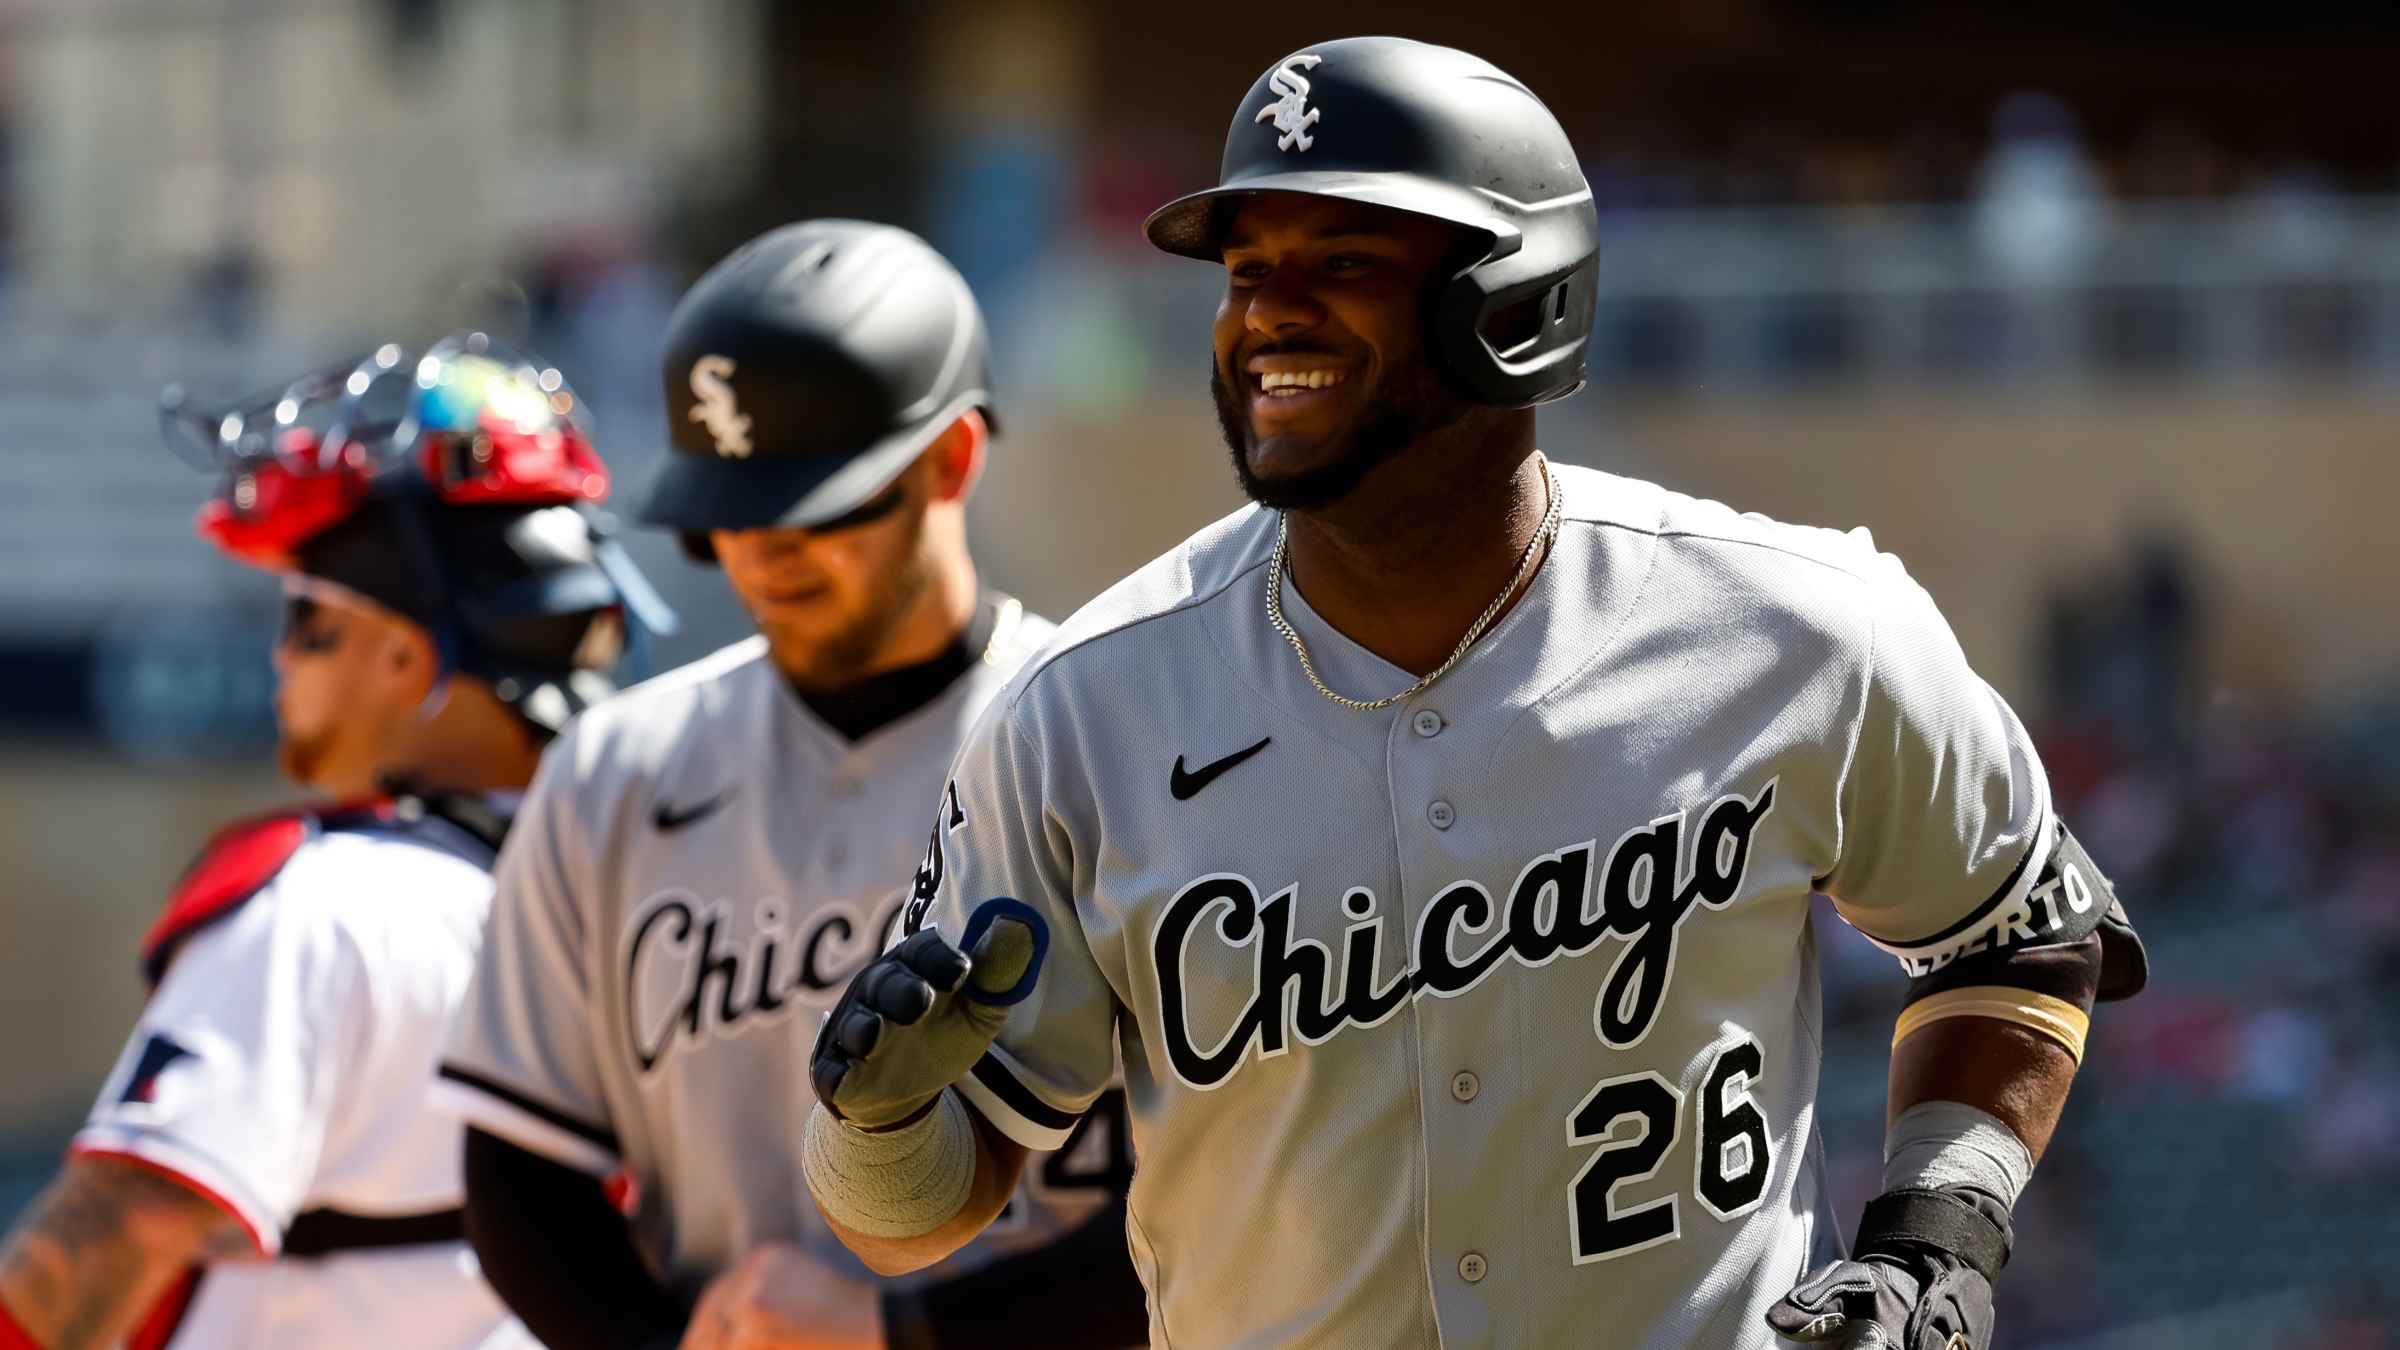 In photos: MLB: Chicago White Sox earn victory over Boston Red Sox - All  Photos 